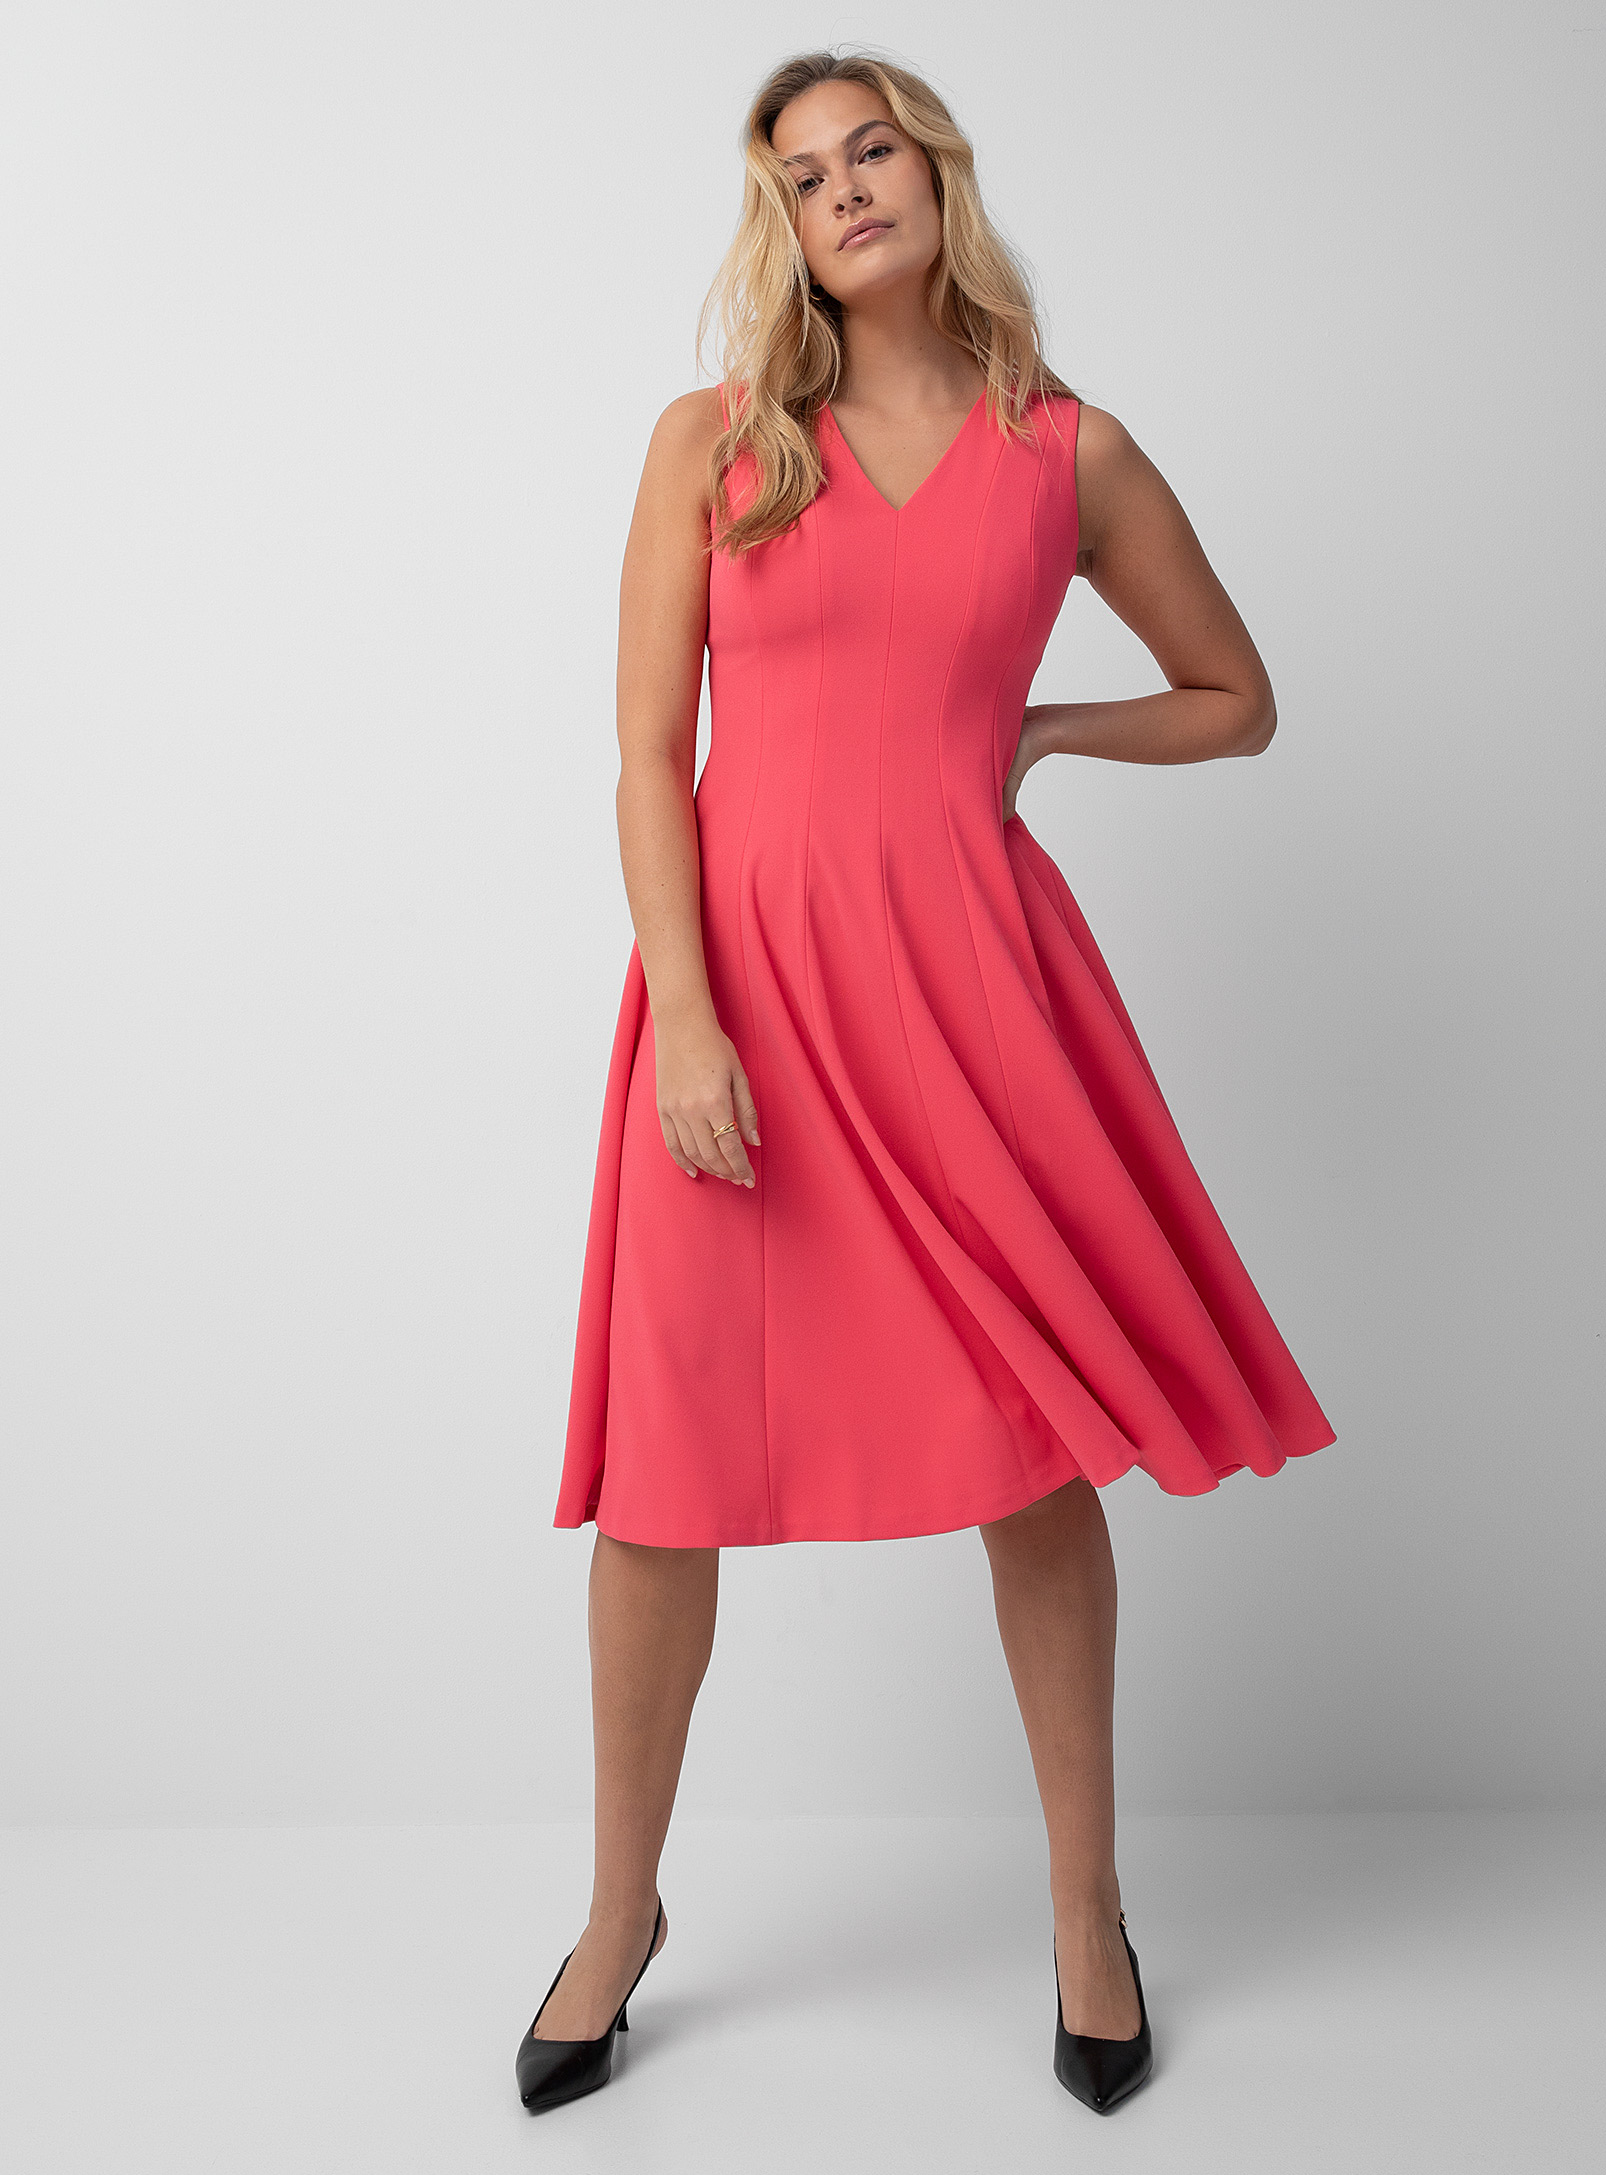 CCalvin Klein - Women's Coral fit-and-flare dress